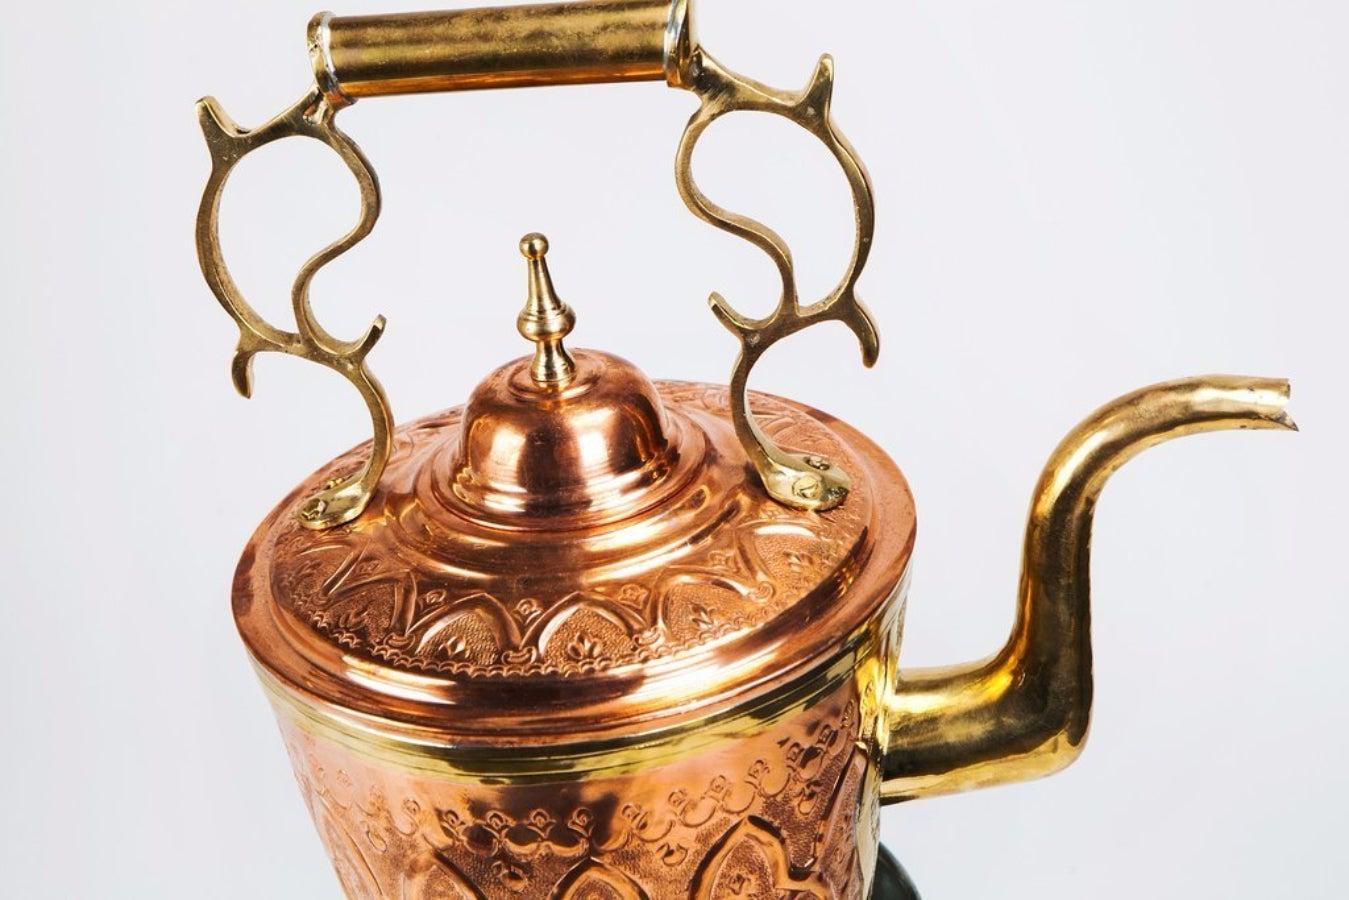 This Mid-Century Moorish  teapot on kettle is made or red copper and brass and stands is a true thing of beauty by standing on a beautifully carved Kettle / pedestal. Handcrafted by master artisans with an abundance of care and attention (and